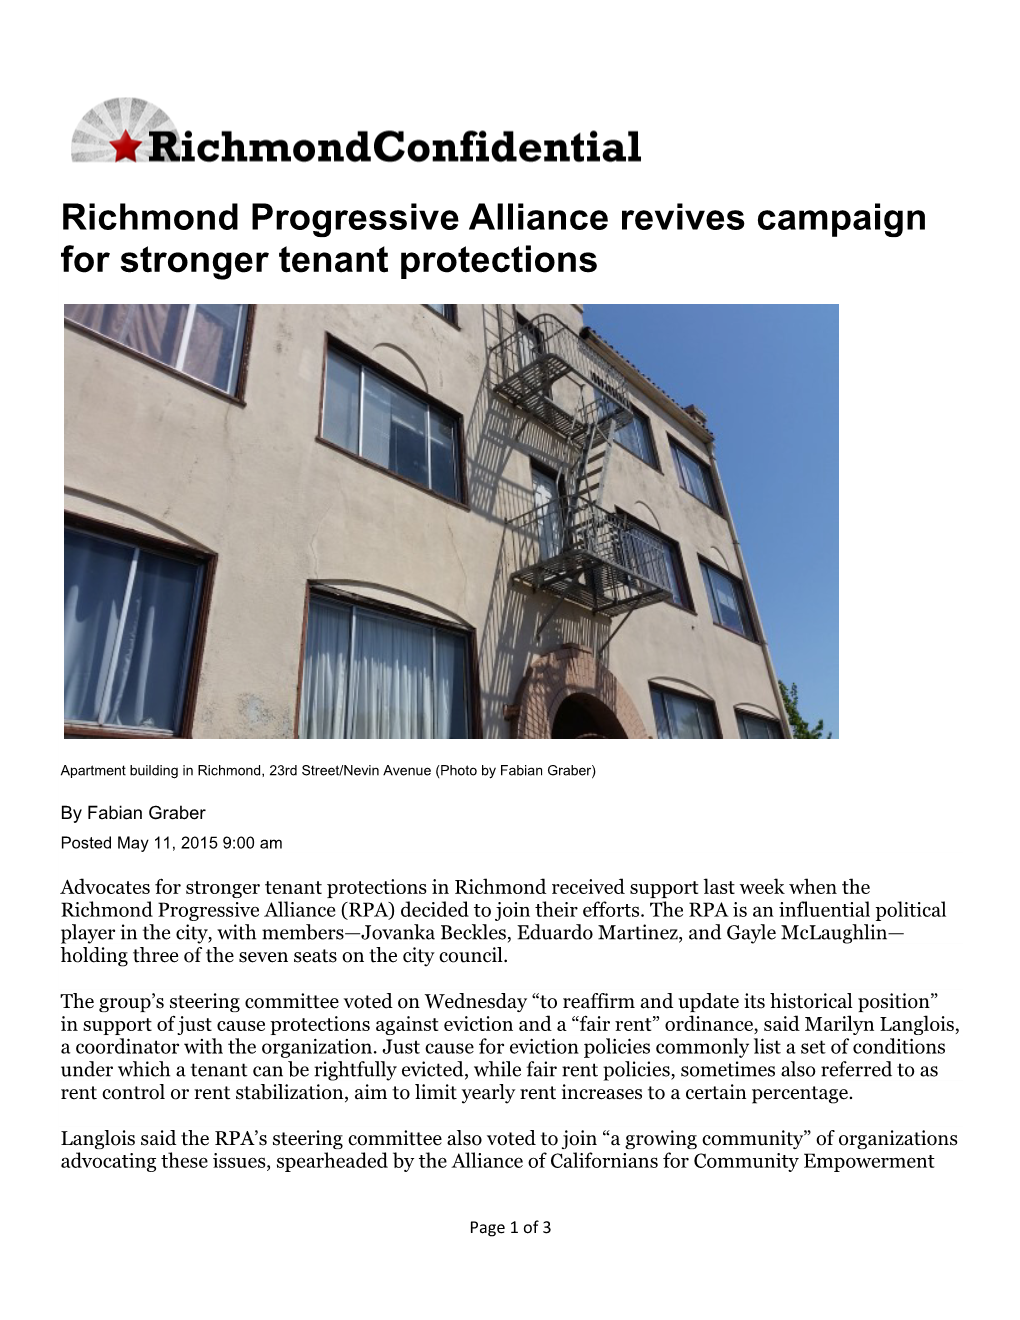 Richmond Progressive Alliance Revives Campaign for Stronger Tenant Protections